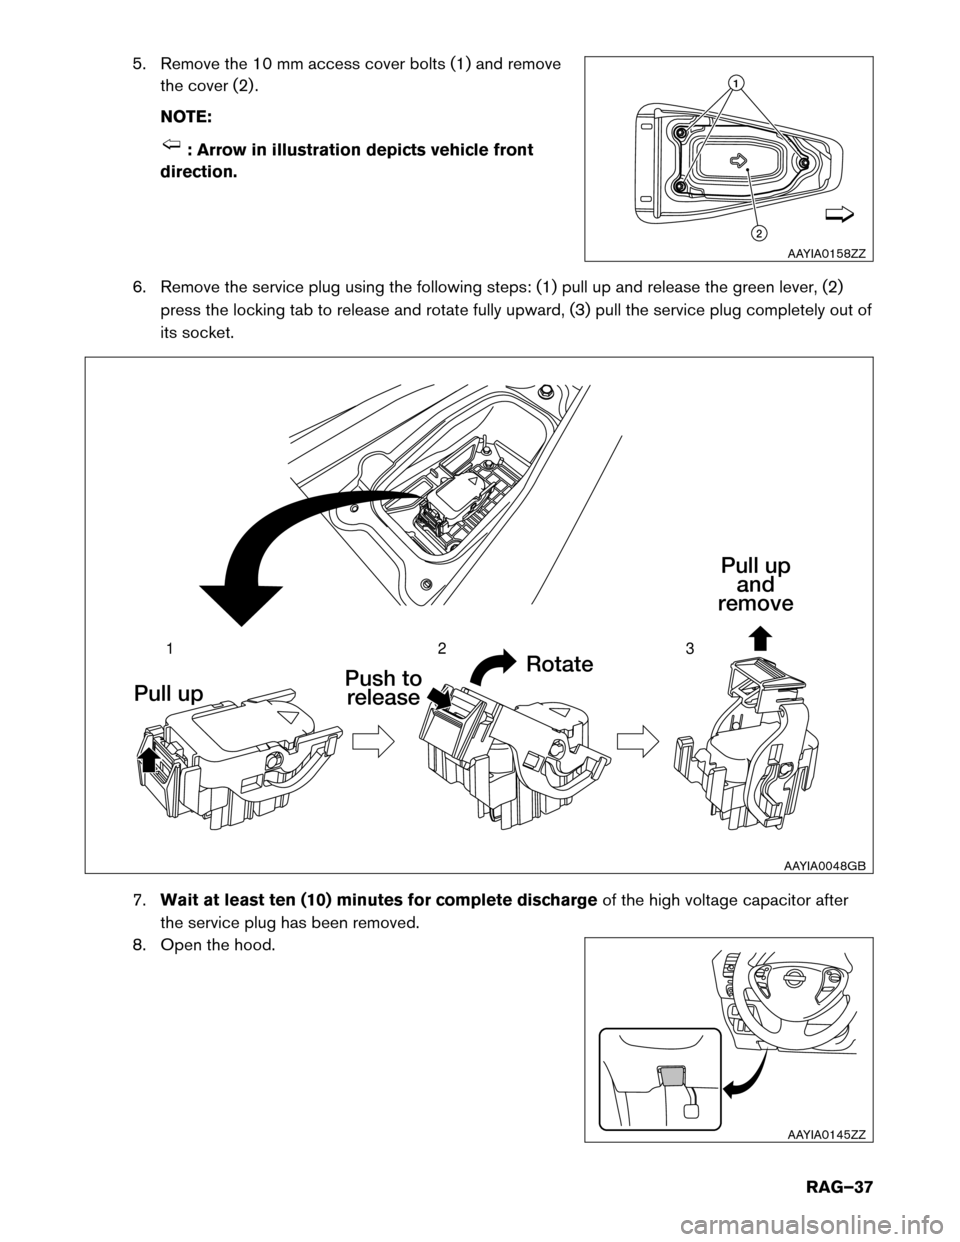 NISSAN LEAF 2014 1.G Roadside Assistance Guide 5. Remove the 10 mm access cover bolts (1) and remove
the cover (2) .
NOTE: : Arrow in illustration depicts vehicle front
direction.
6.

Remove the service plug using the following steps: (1) pull up 